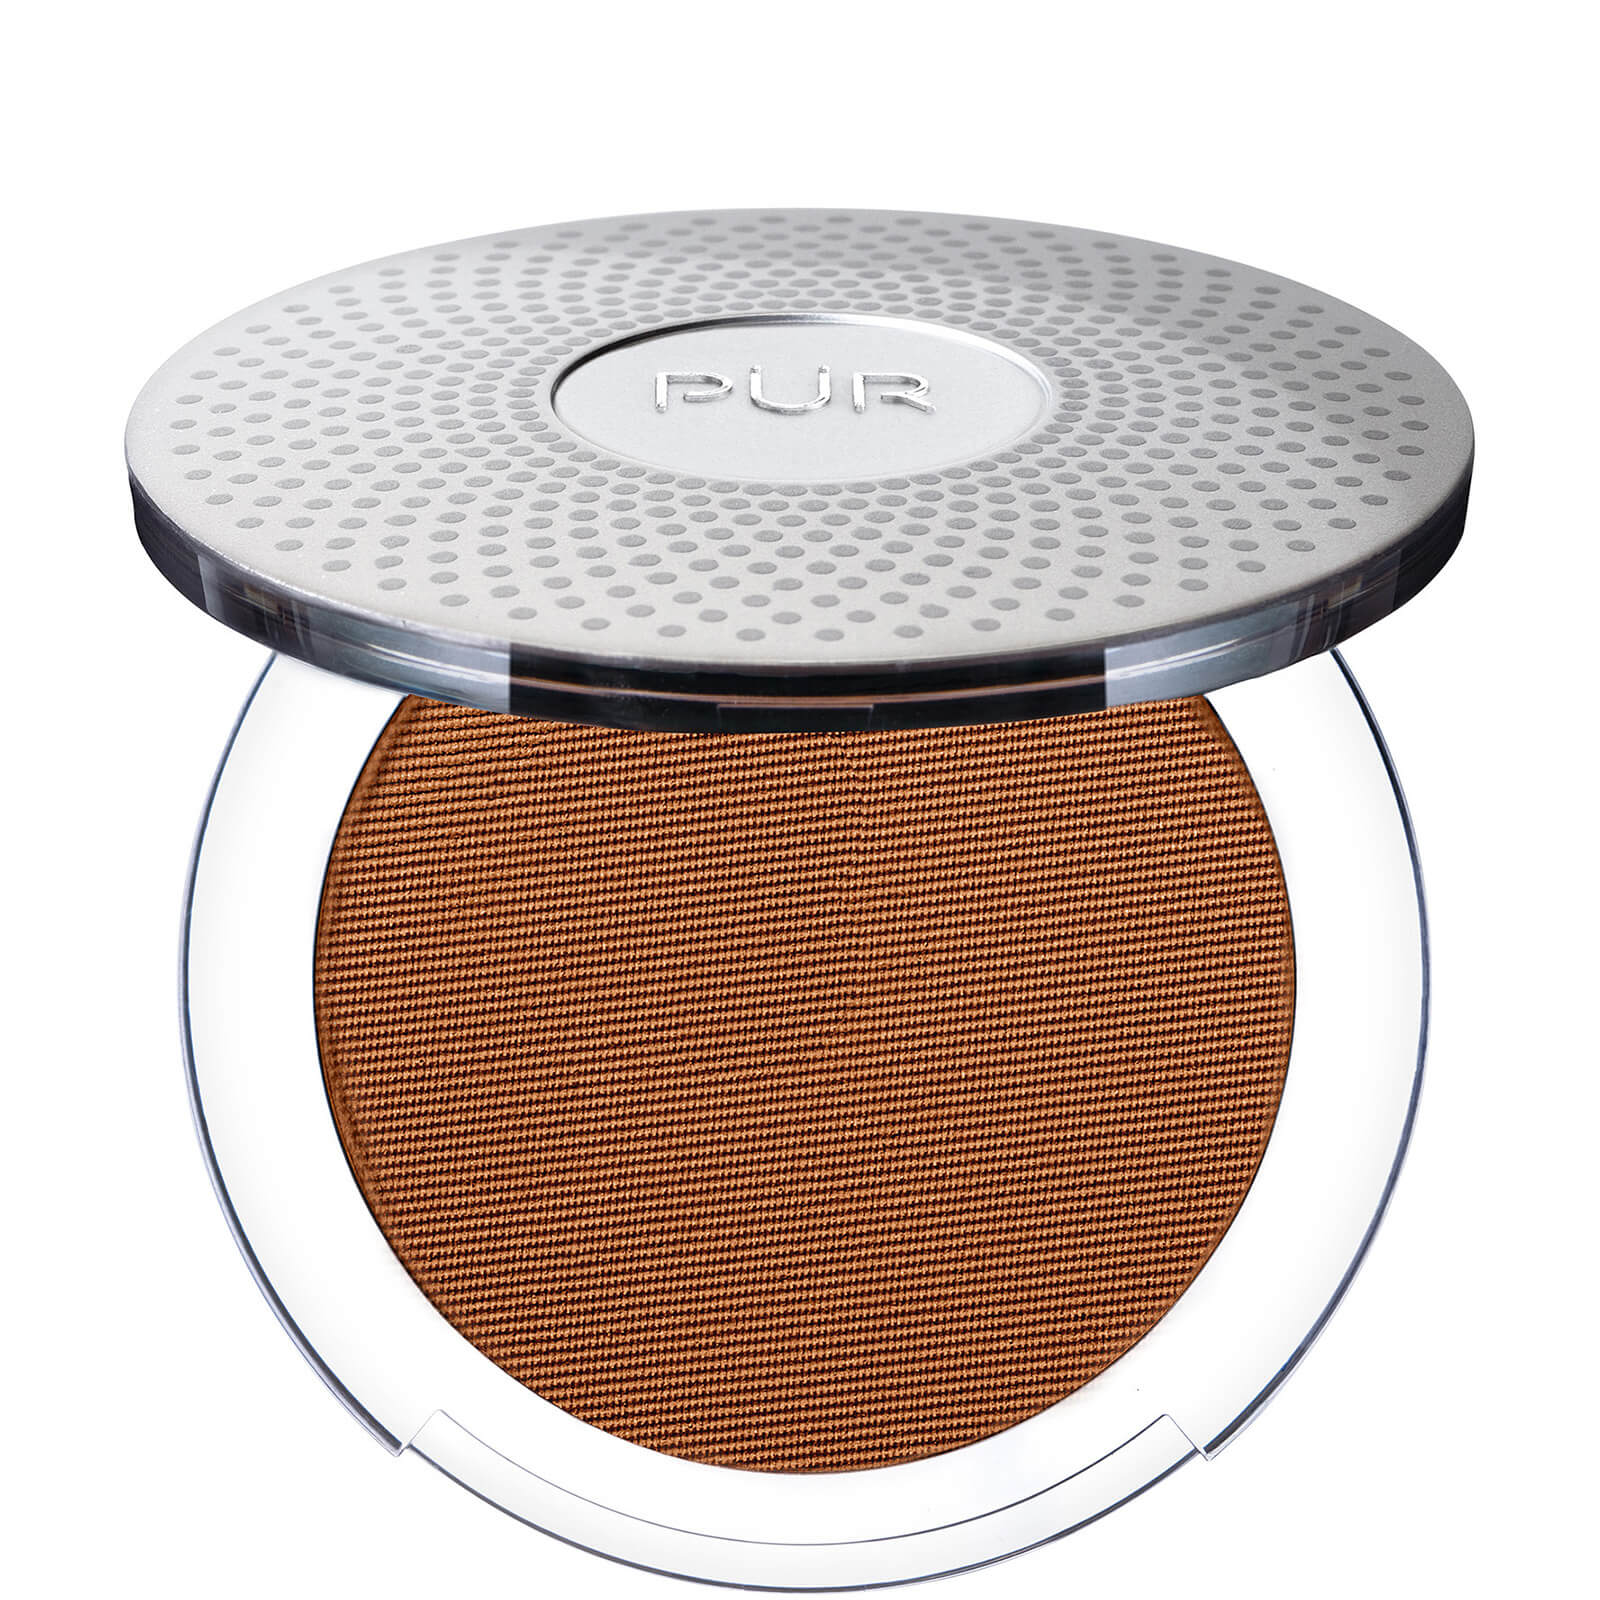 PÜR 4-in-1 Pressed Mineral Make-up 8g (Various Shades) - DN5/Cinnamon